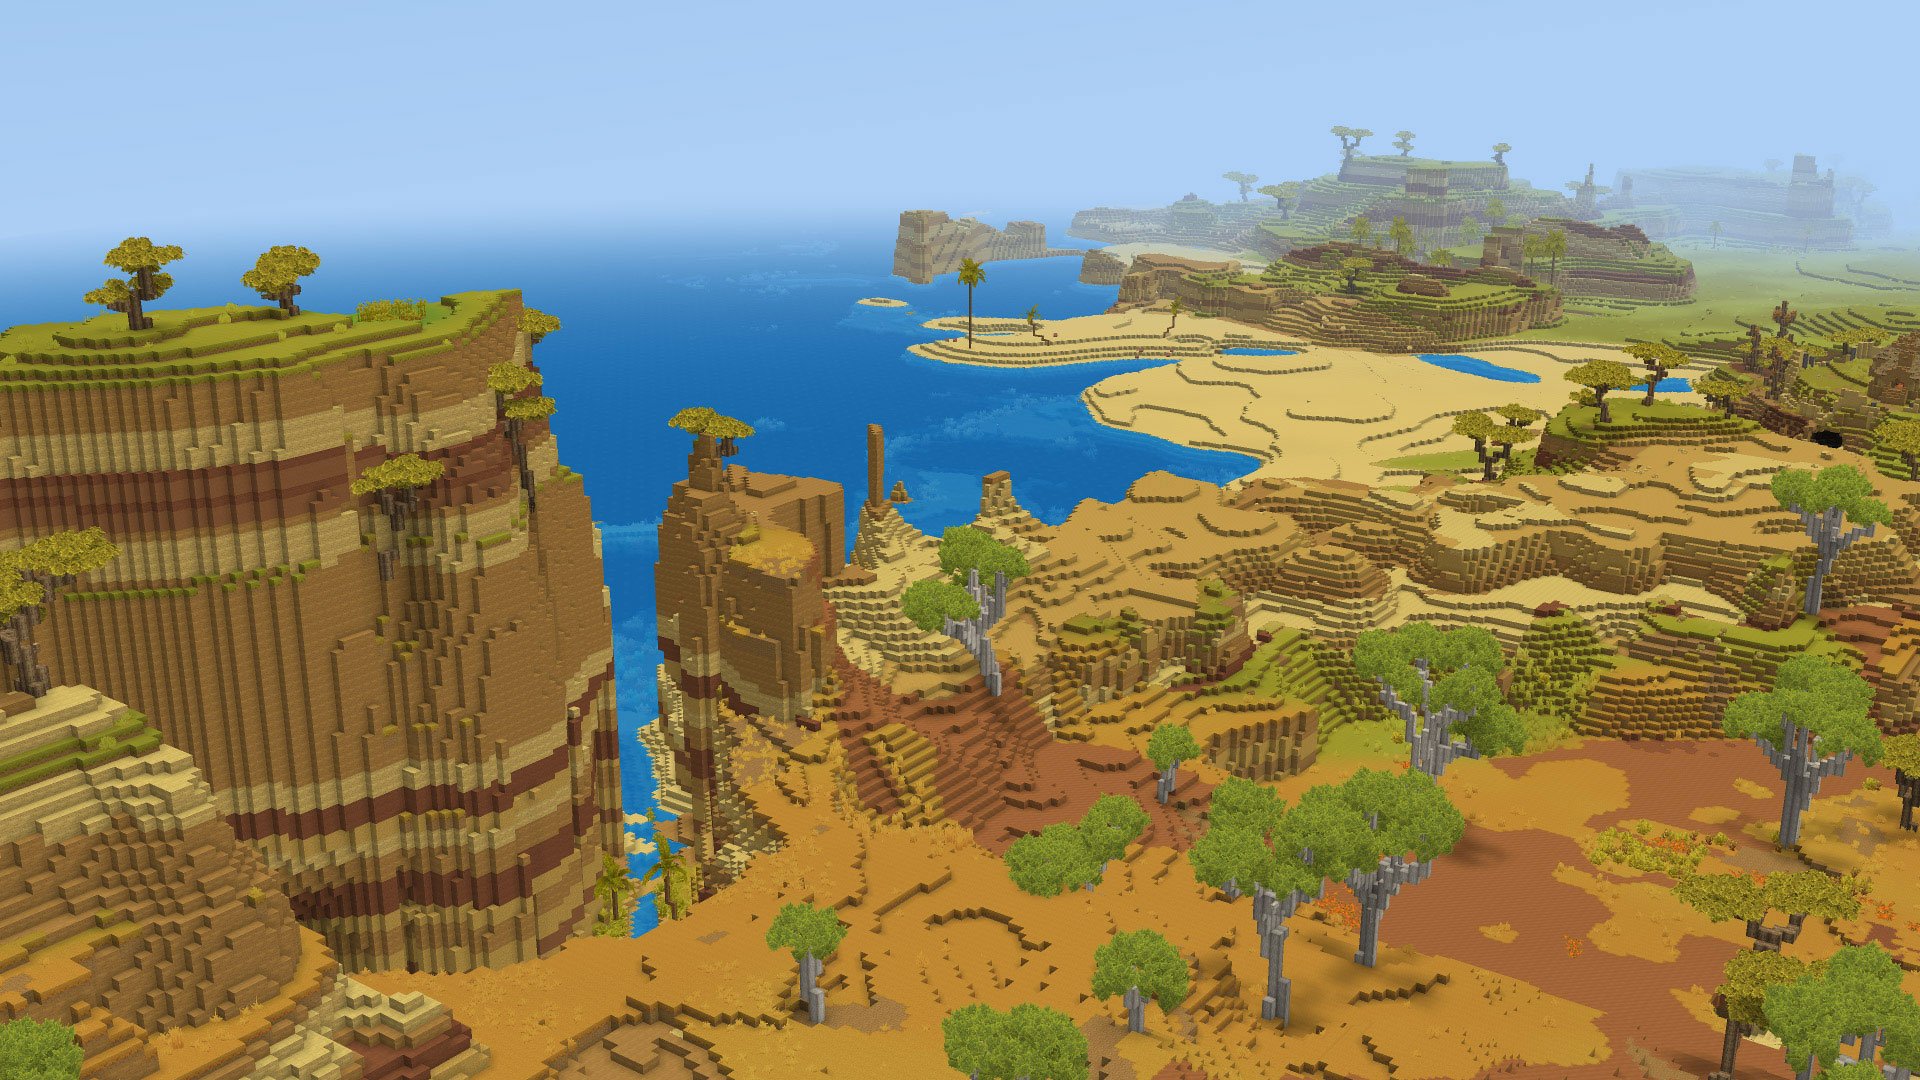 hytale beta release date march